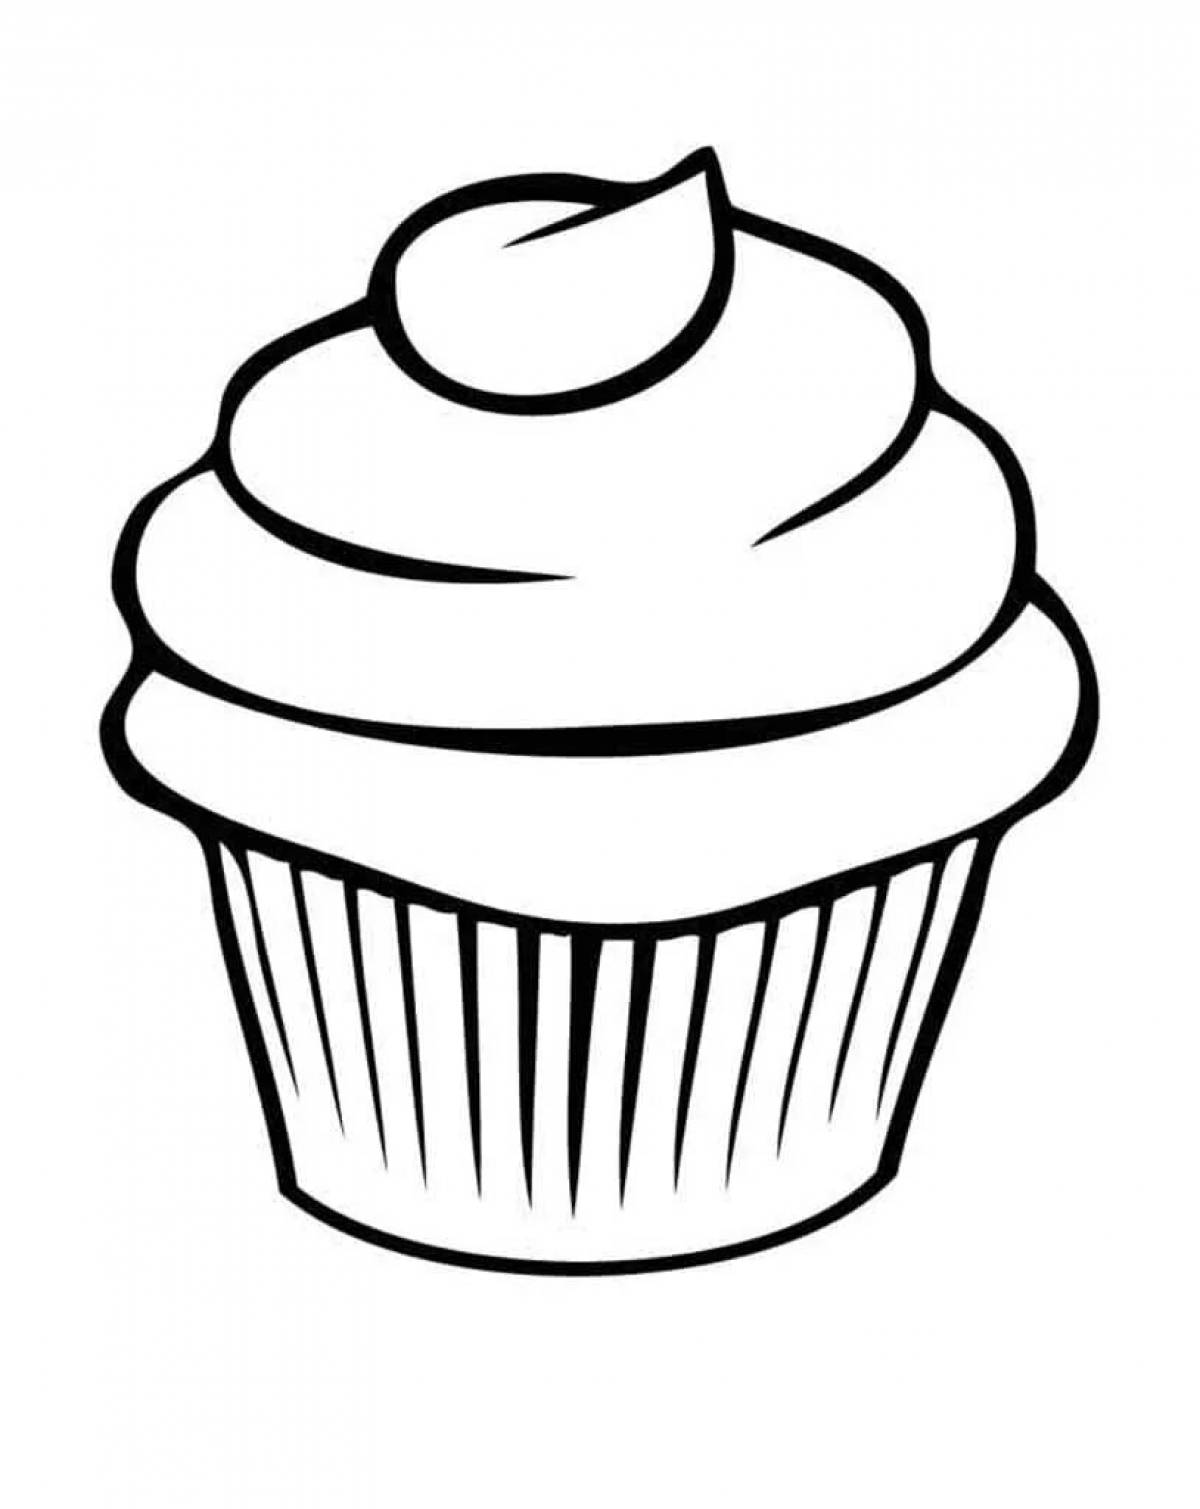 Coloring page adorable cupcake